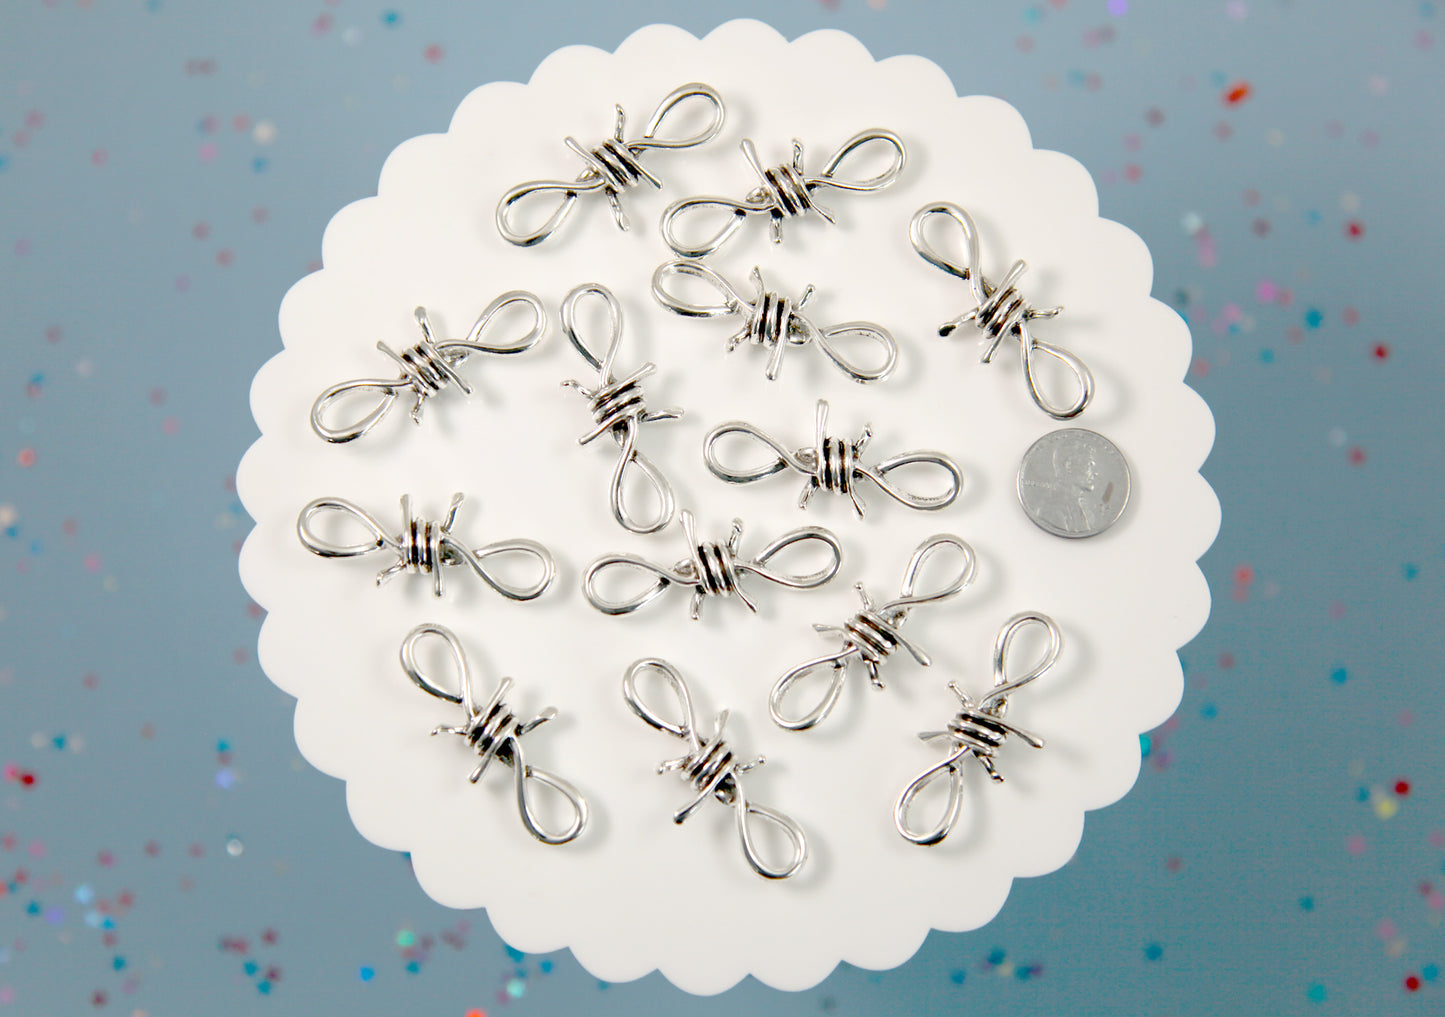 45mm Lg Metal Barbed Wire Charms - 6 pc set - Barb Wire Link Charm - Easily Connect to make a Necklace